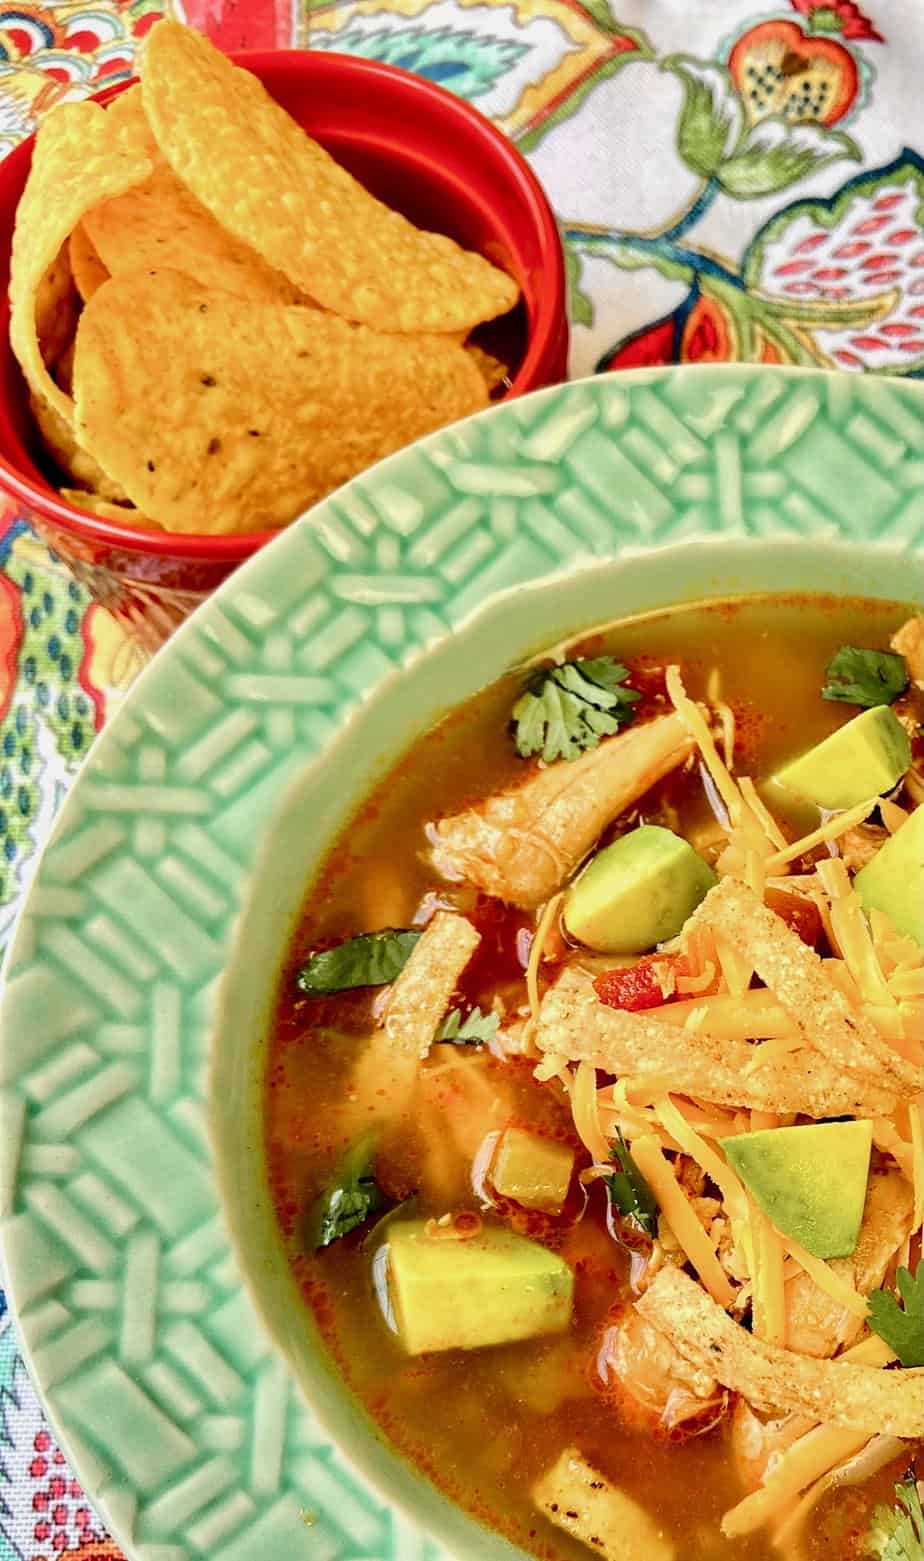 Tortilla soup in turquoise bowl.